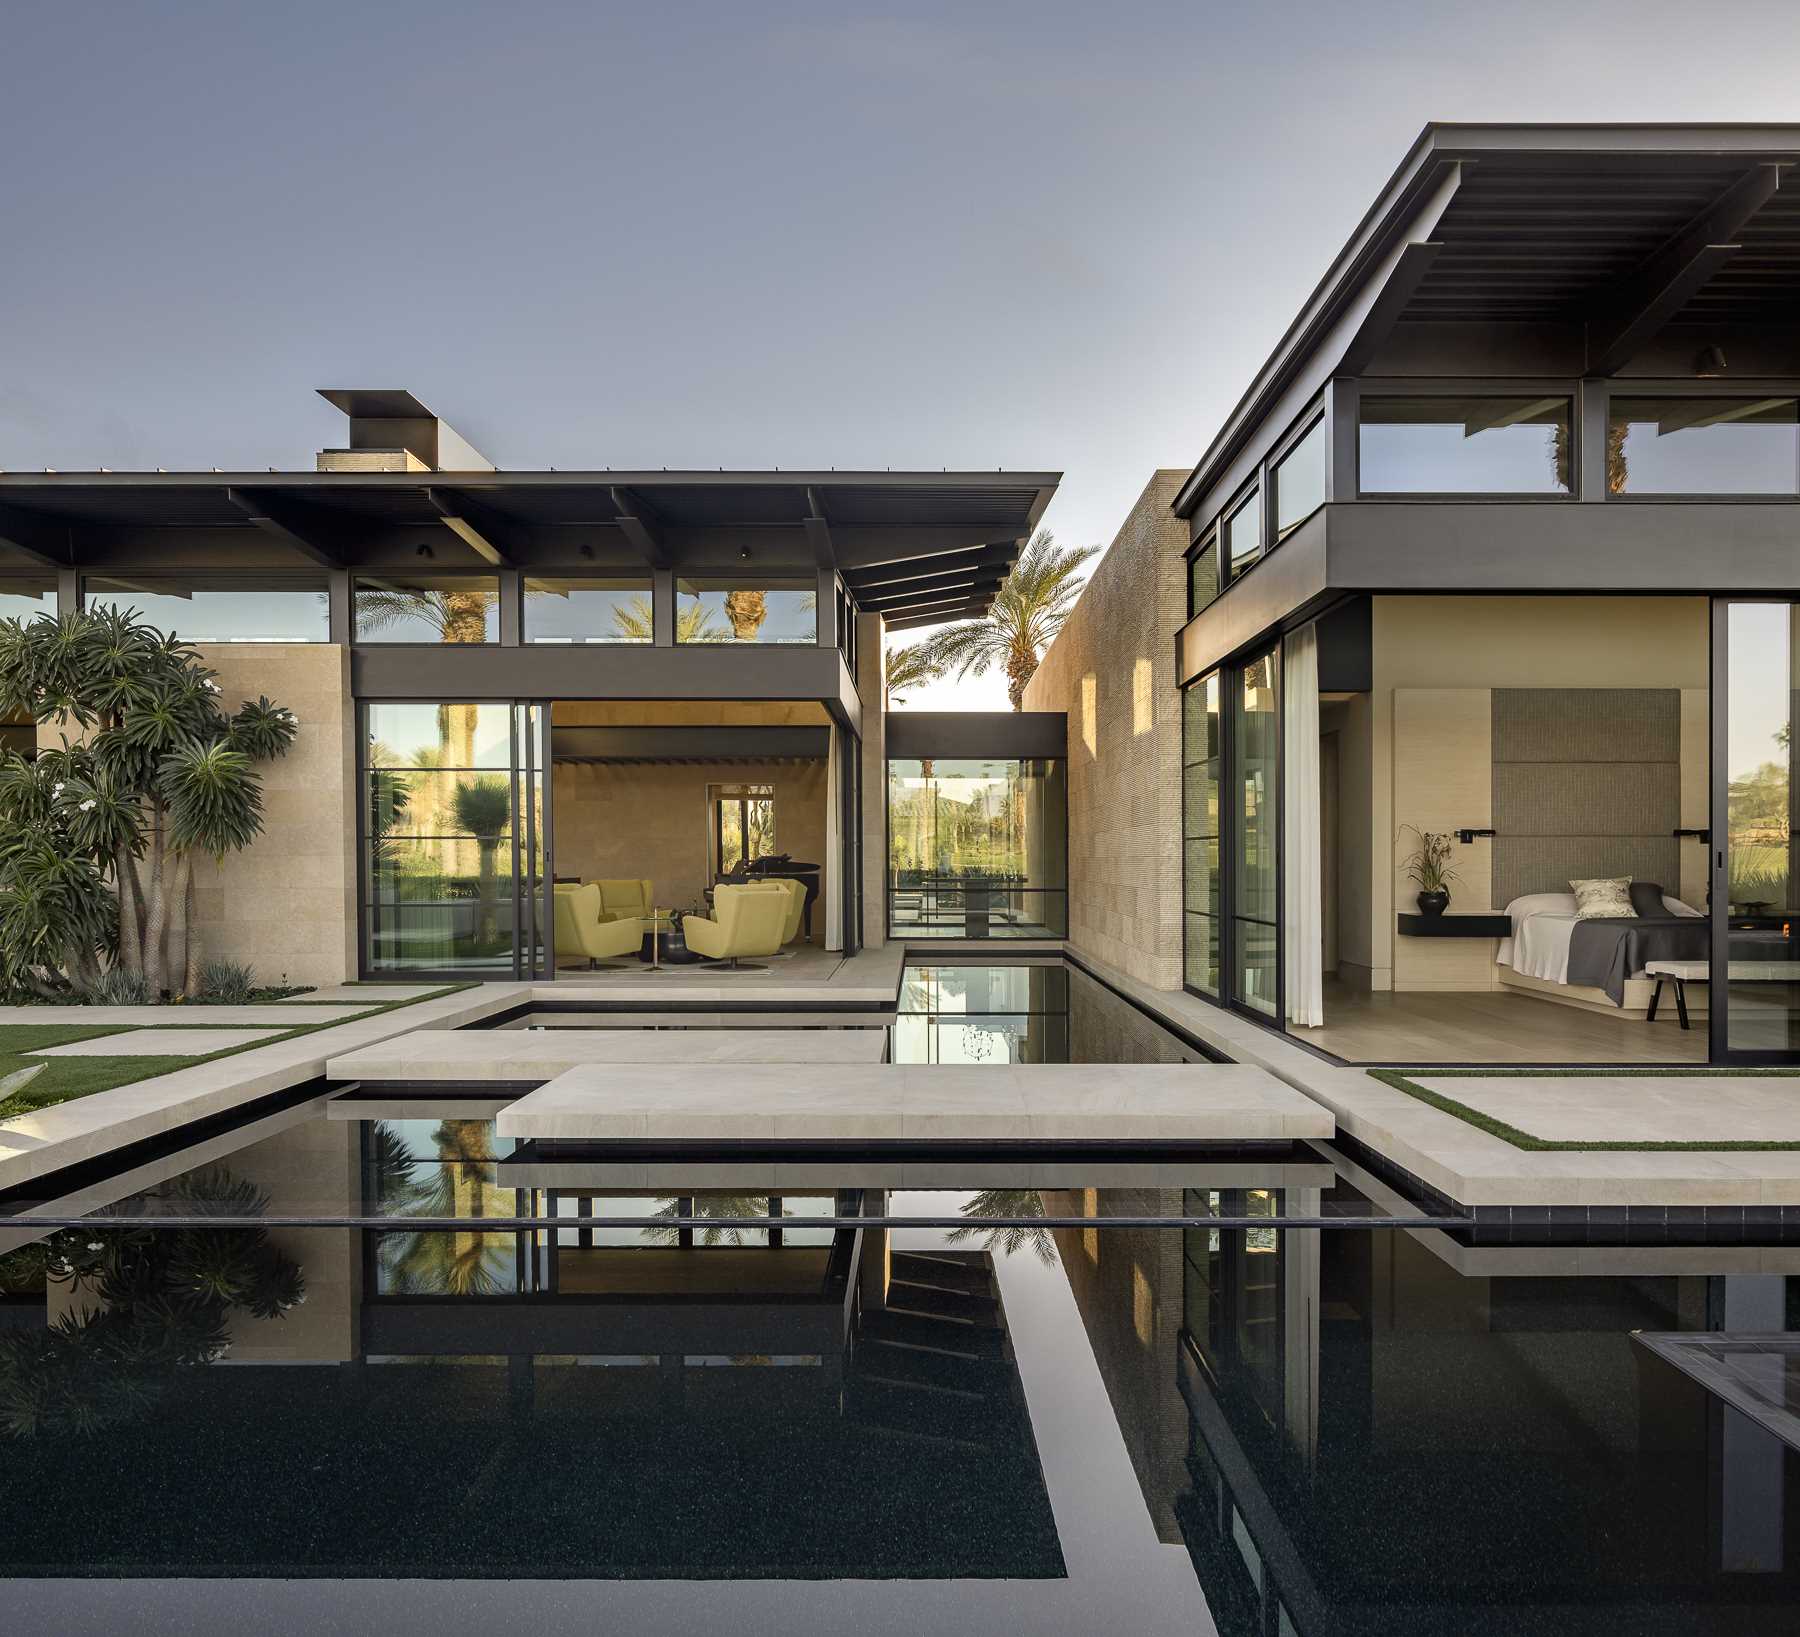 A modern home that opens to the outdoors, where reflecting ponds and concrete lily pads can be found.